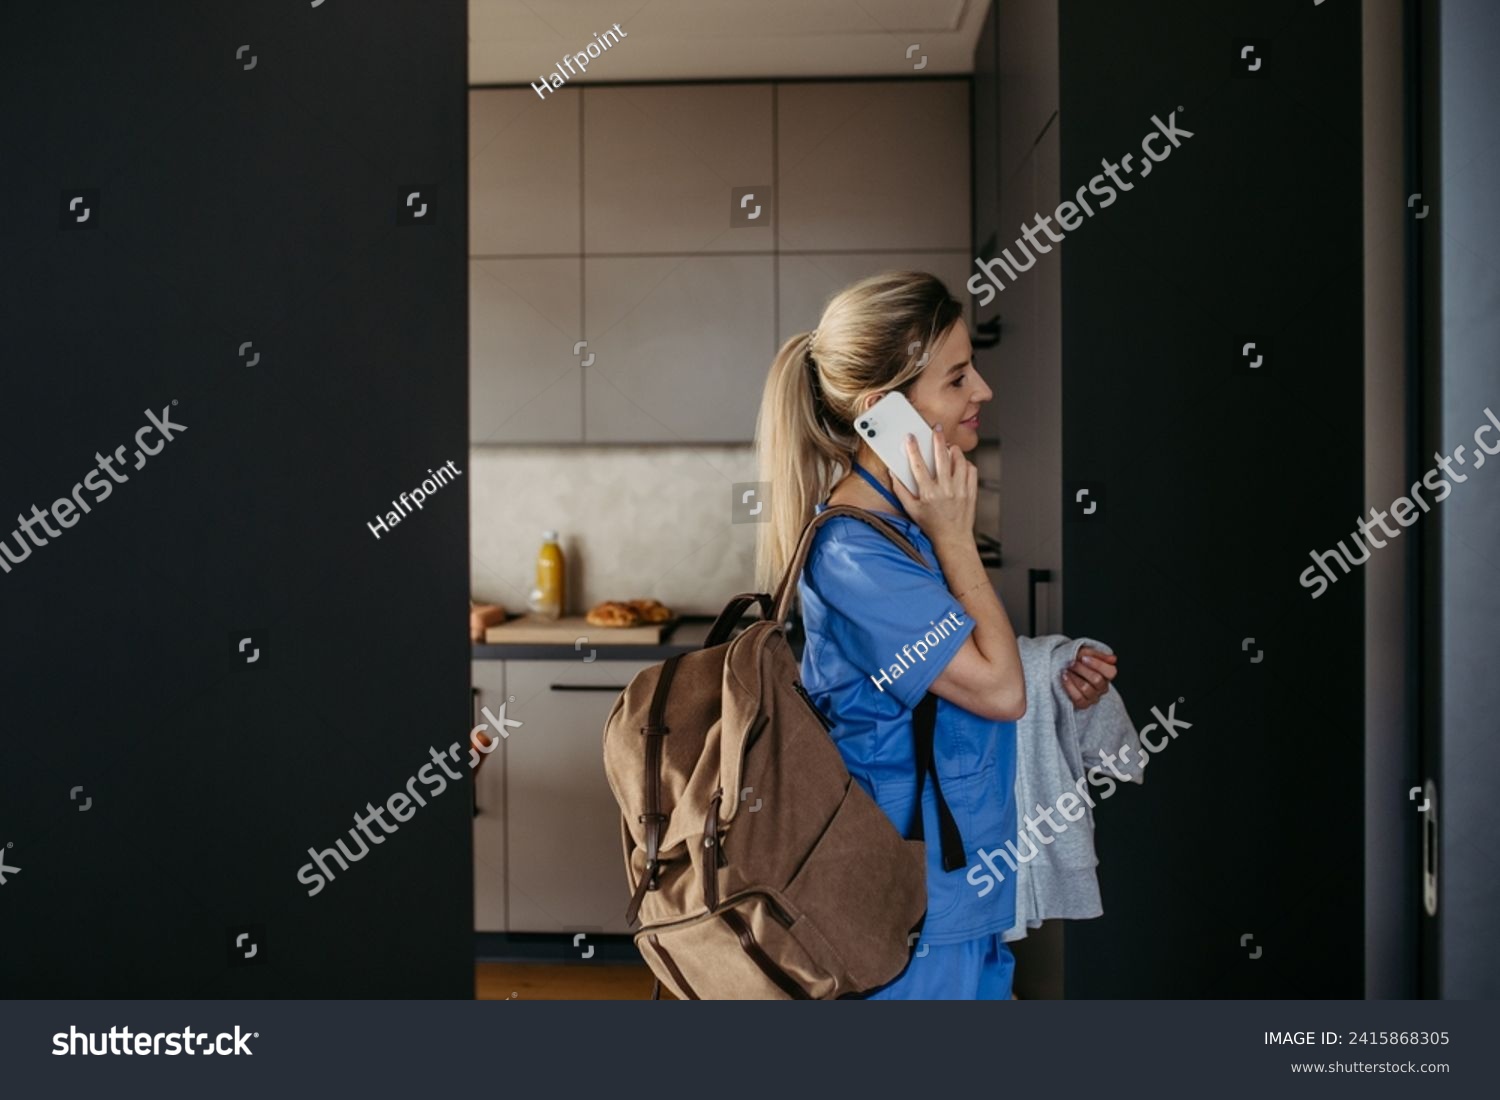 Female doctor getting ready for work, reading message on smartphone, leaving house in scrubs with backpack. Work-life balance for healthcare worker. #2415868305